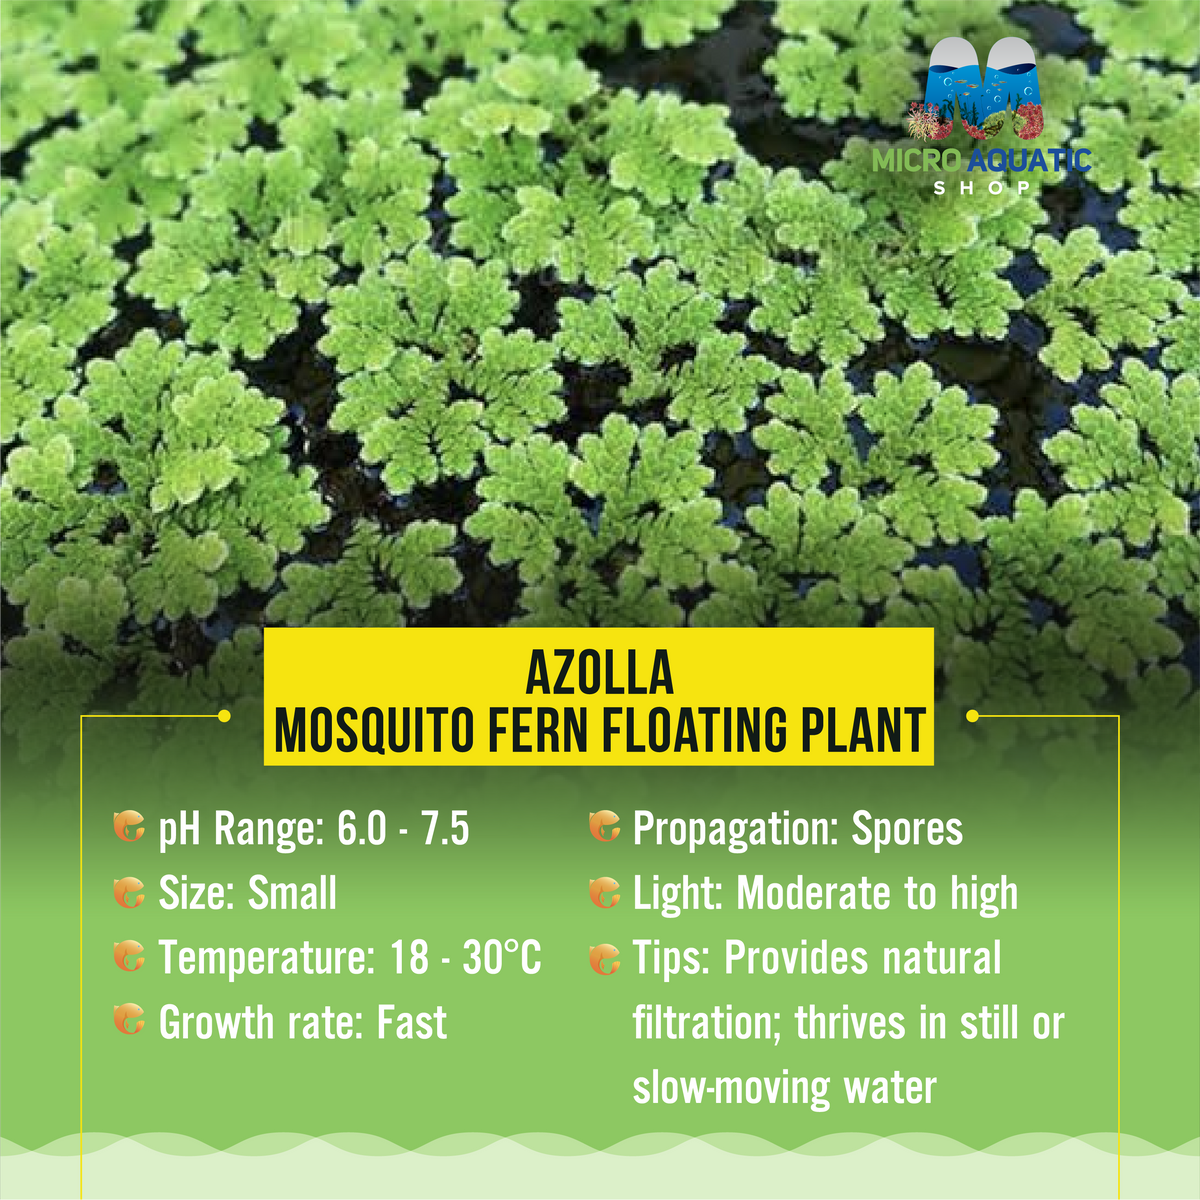 Azolla - Mosquito Fern Floating Plant